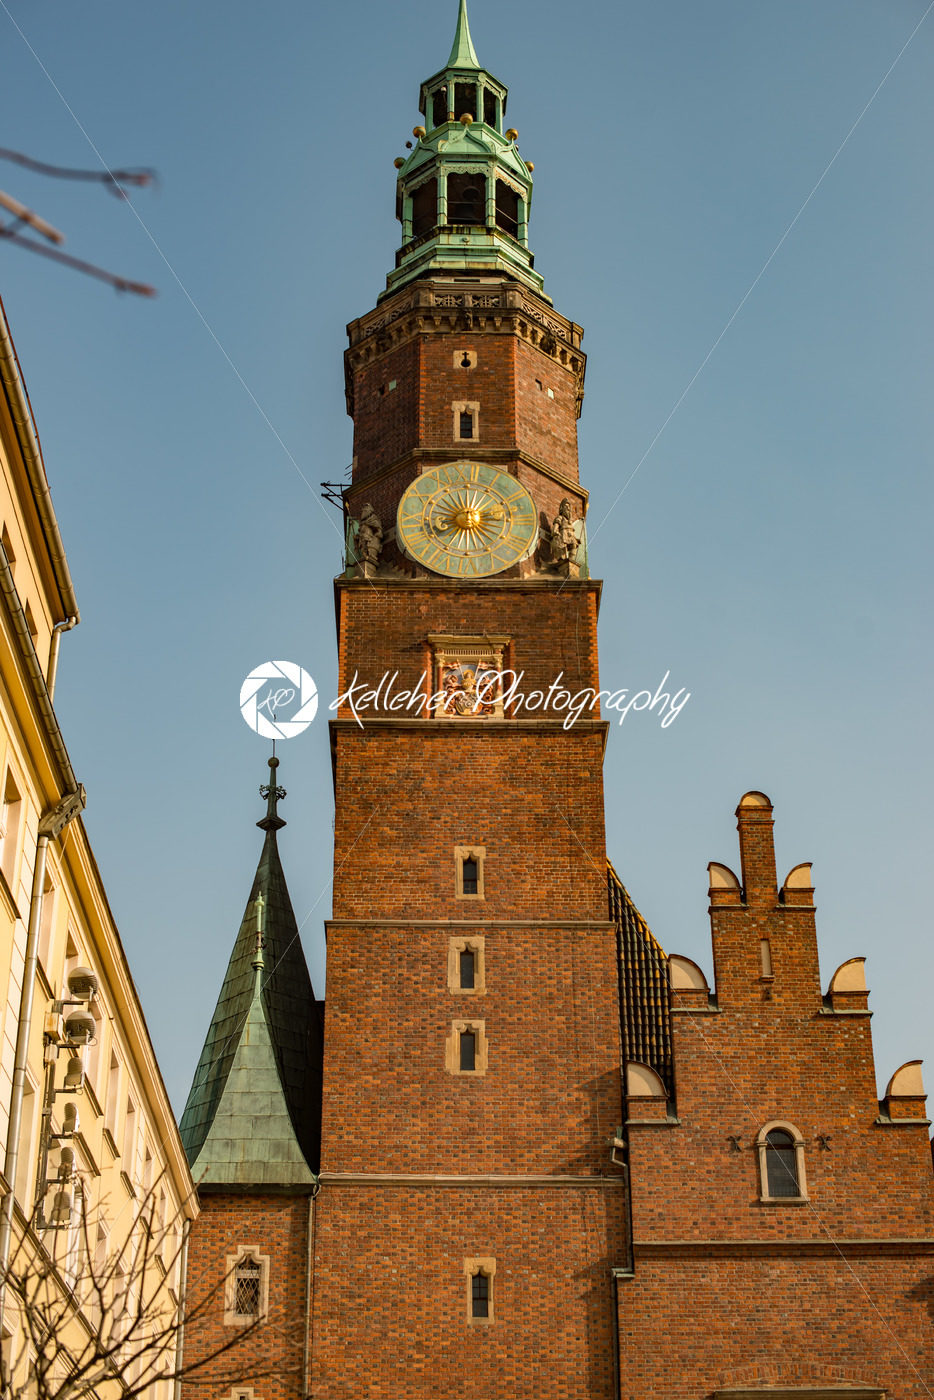 Wroclaw, Poland – March 4, 2018: Wroclaw Town Hall clock tower in evening in historic capital of Silesia, Poland, Europe. - Kelleher Photography Store